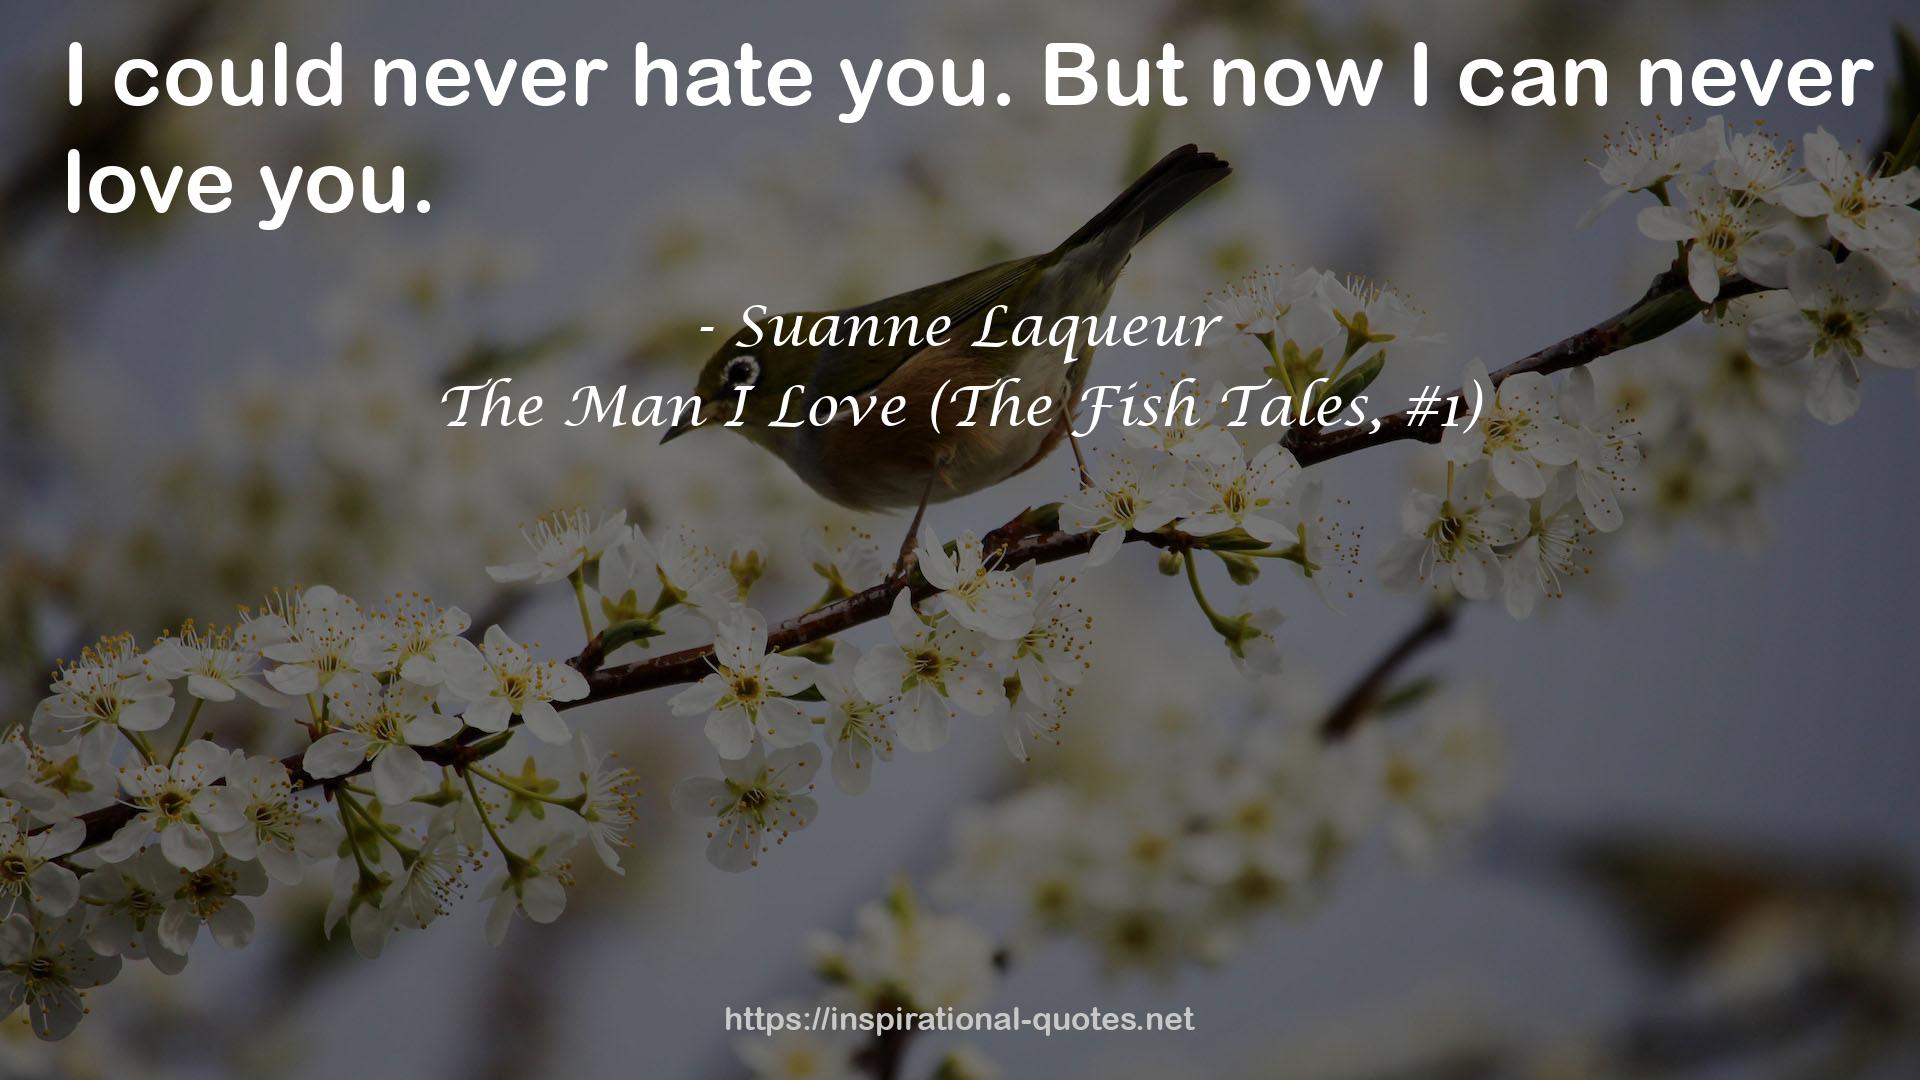 The Man I Love (The Fish Tales, #1) QUOTES